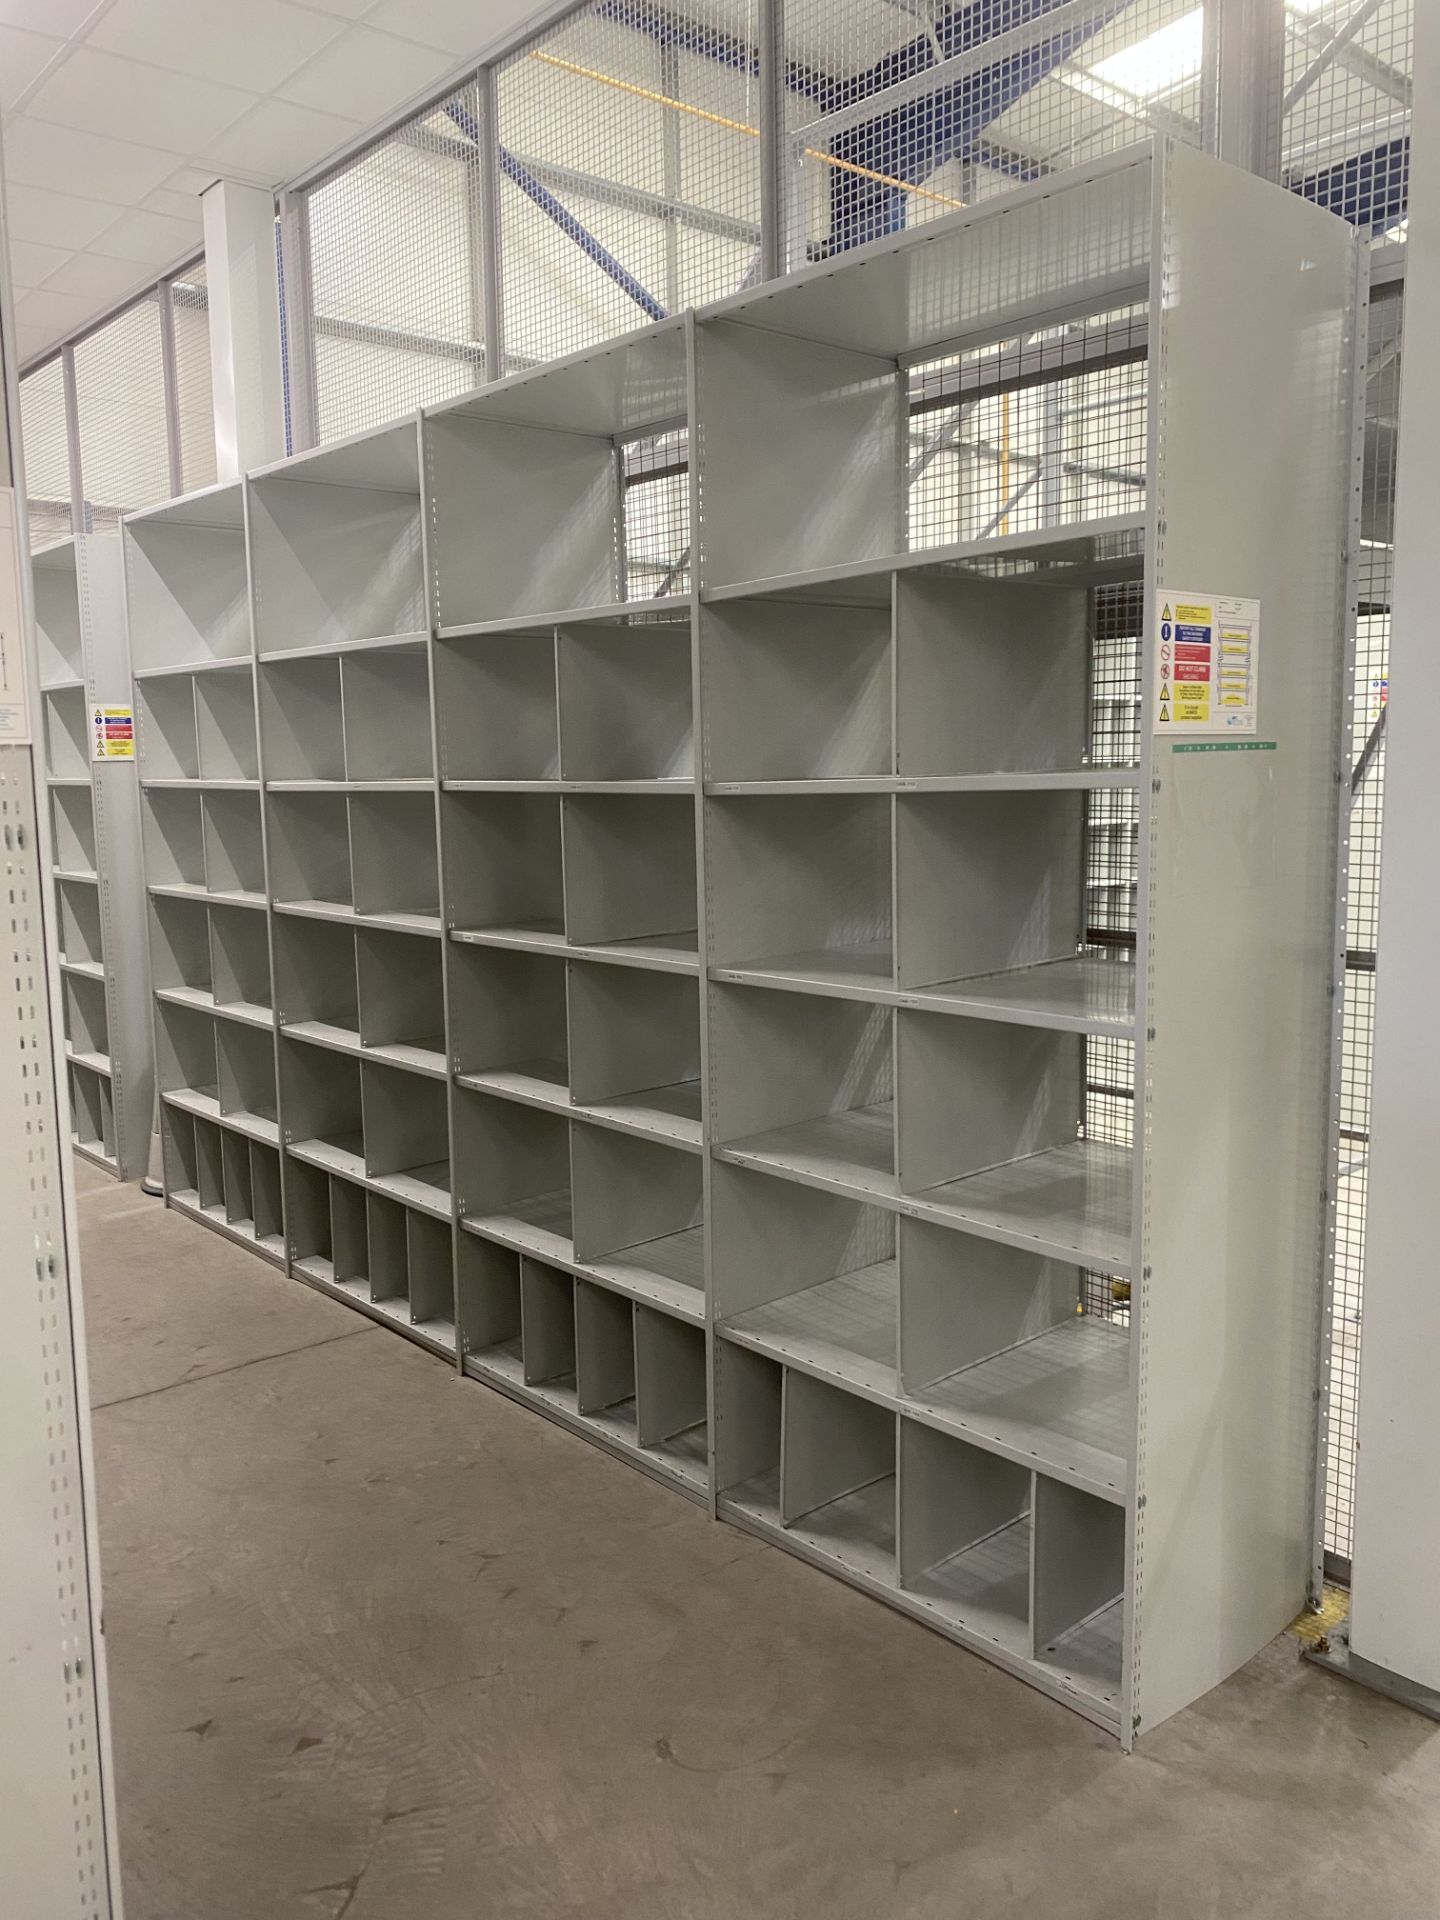 4 BAYS X ADJUSTABLE WAREHOUSE SHELVING - (CAN BE DISMANTLED) - Image 3 of 3